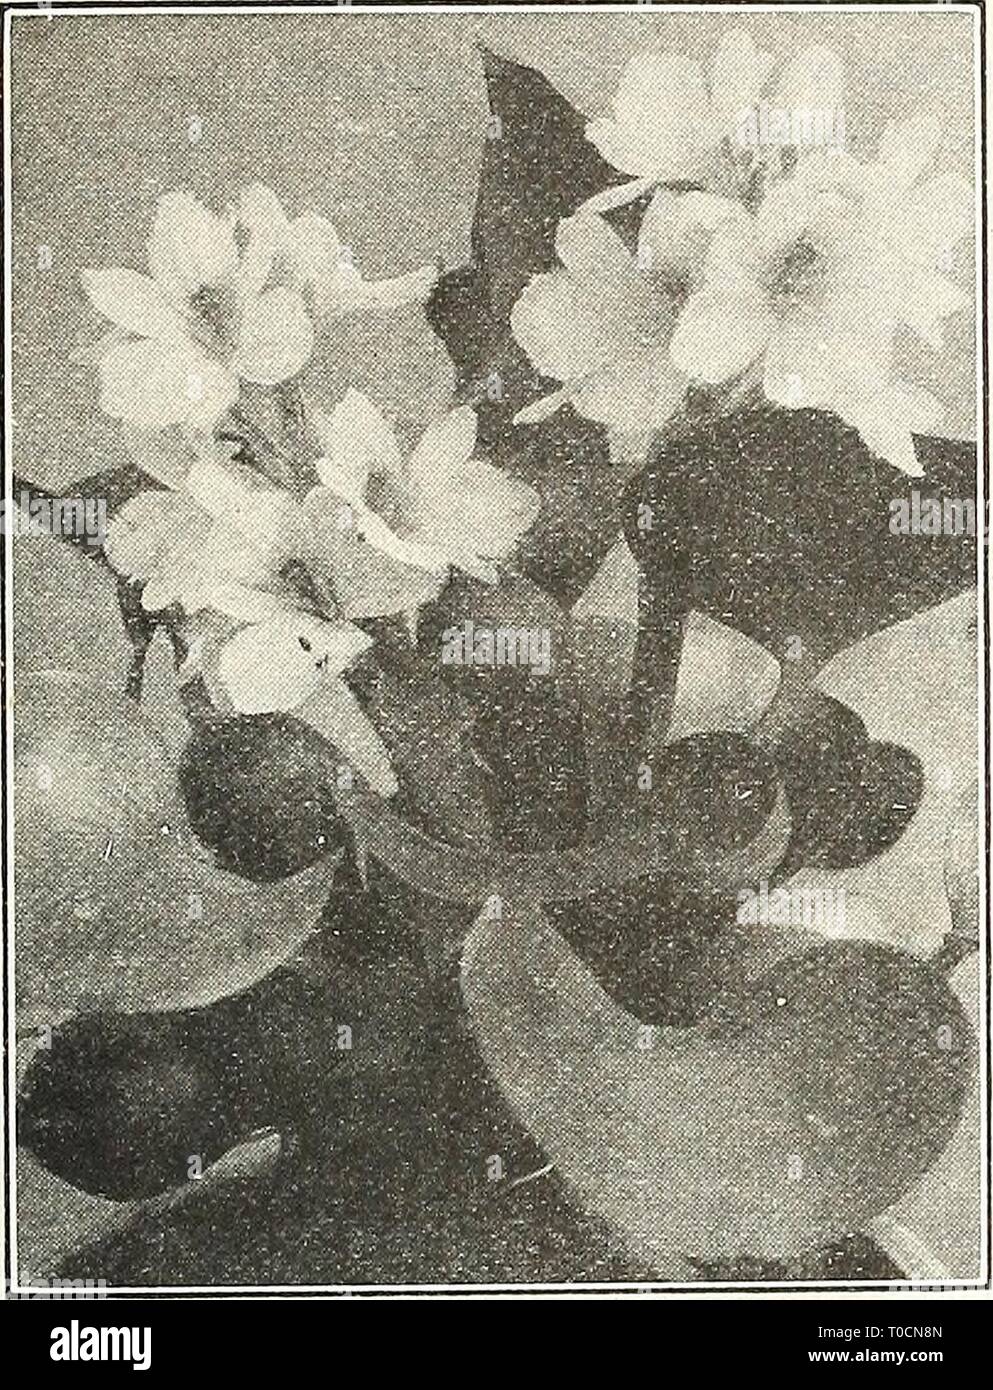 Dreer's garden book 1924 (1924) Dreer's garden book 1924 dreersgardenbook1924henr Year: 1924  pfJAMll MffERLILIES^ AQUATICS A 209 SCELLANEOUS AQUATICS    EiCHHORNiA (Water Hyacinth) For marginal and shallow water planting. Acorus Japonicus Variegatus (Variegated Sweet Flag). 25 cts. each. Cyperus Alternifolius {Umbrella Planl). 25 cts. each; $2.50 per doz. Cyperus Papyrus (Papyrus Ajitiqiiorum). The true Egyptian Paper Plant. 50 cts. each; specimen plants in 11 in. tubs, $2.50 each. Eichhornia Azurea. Flowers a lovely shade of lavender-blue. This species of Water Hyacinth requires to be plante Stock Photo